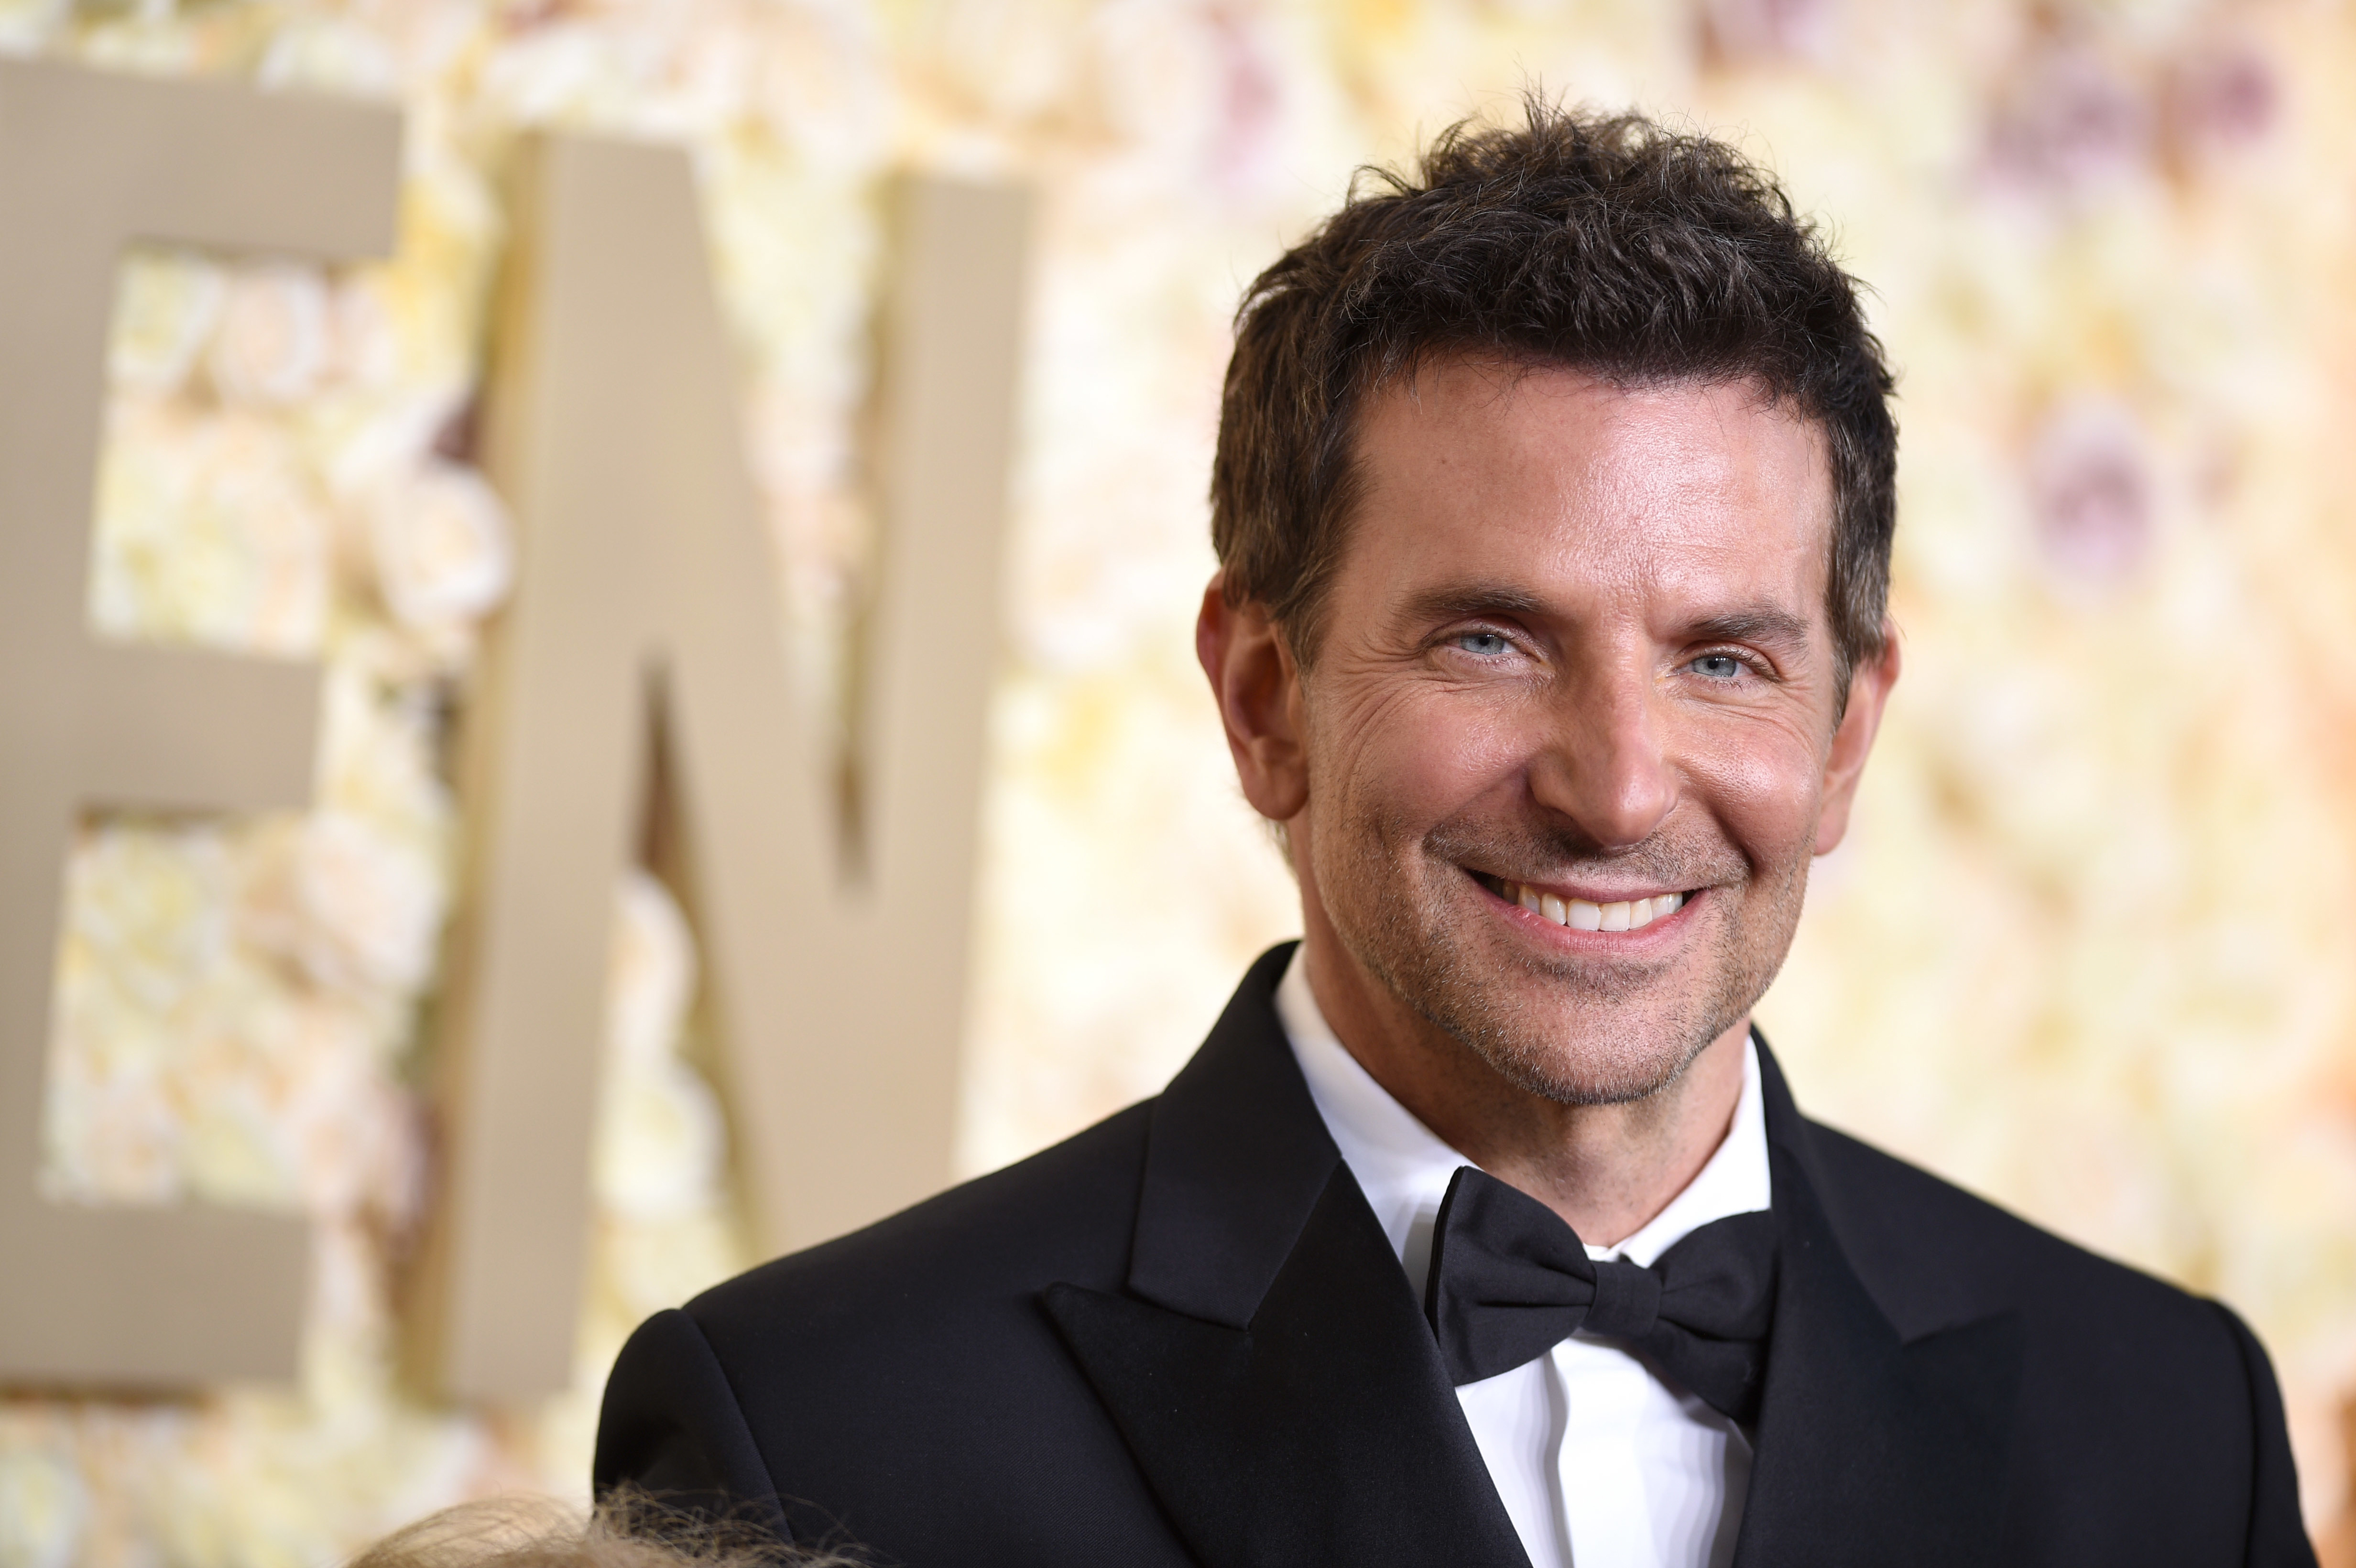 Bradley Cooper in a tuxedo on a red carpet smiling